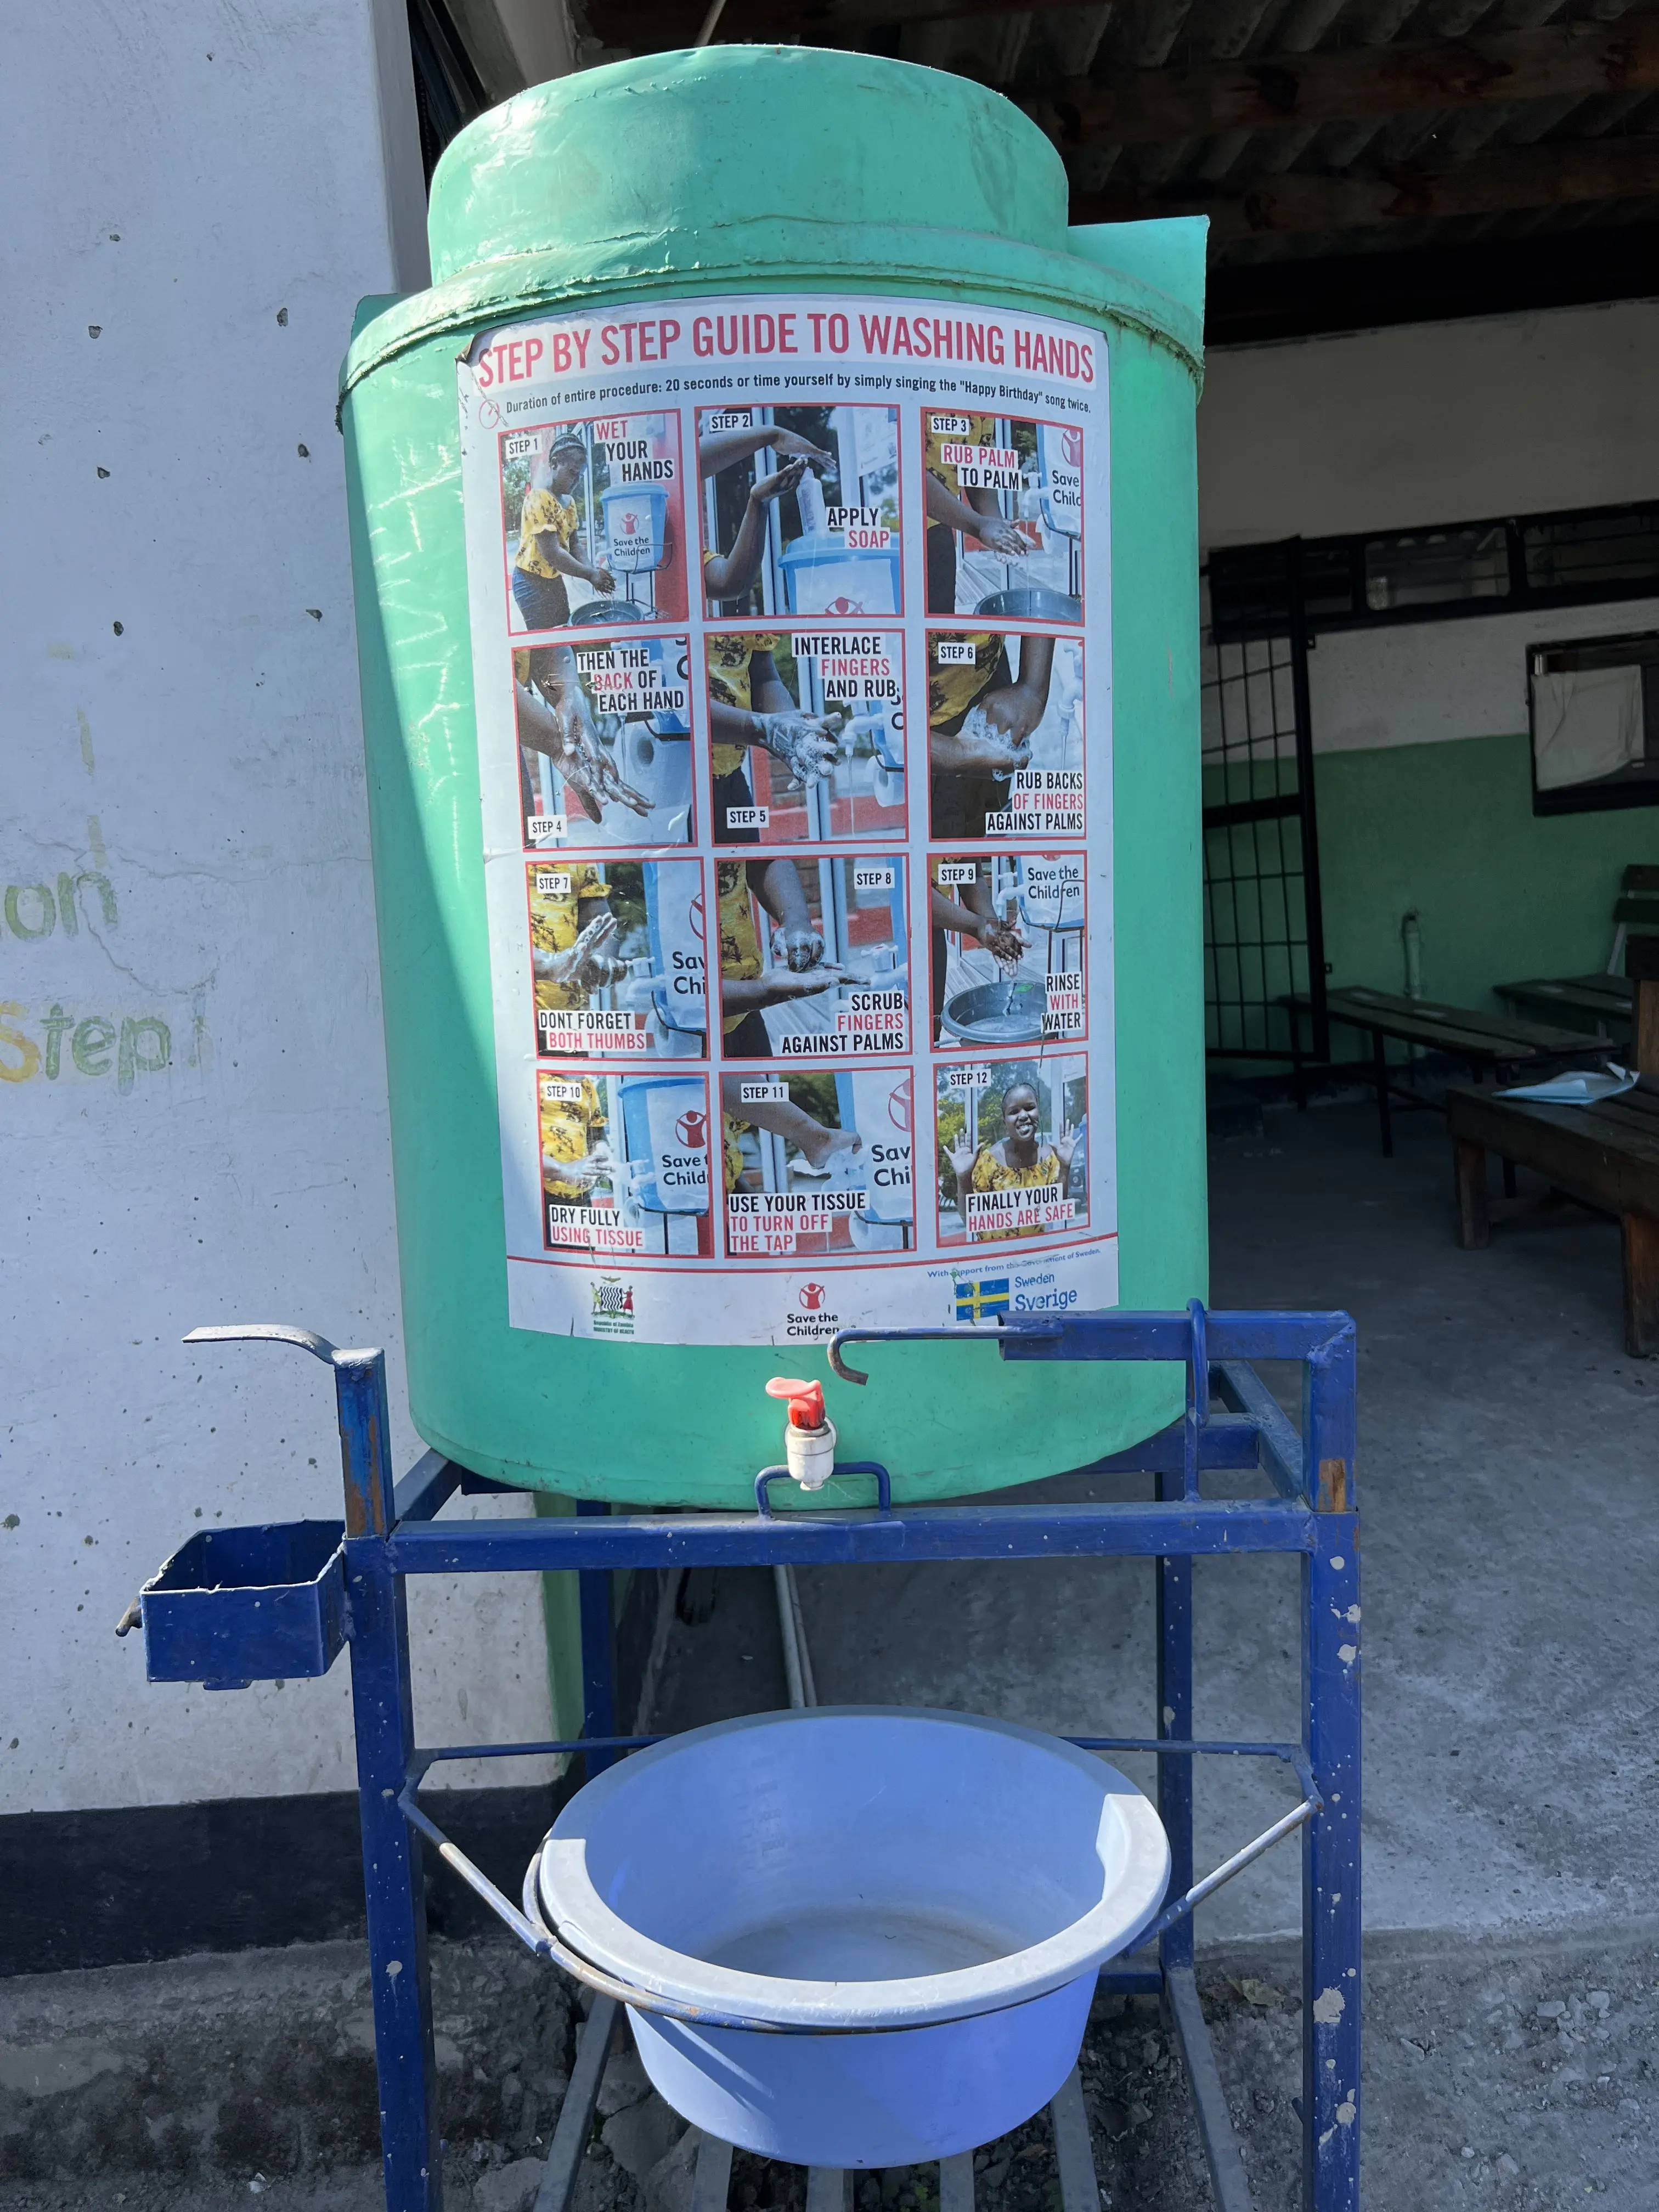 A hand washing station with graphic instructions